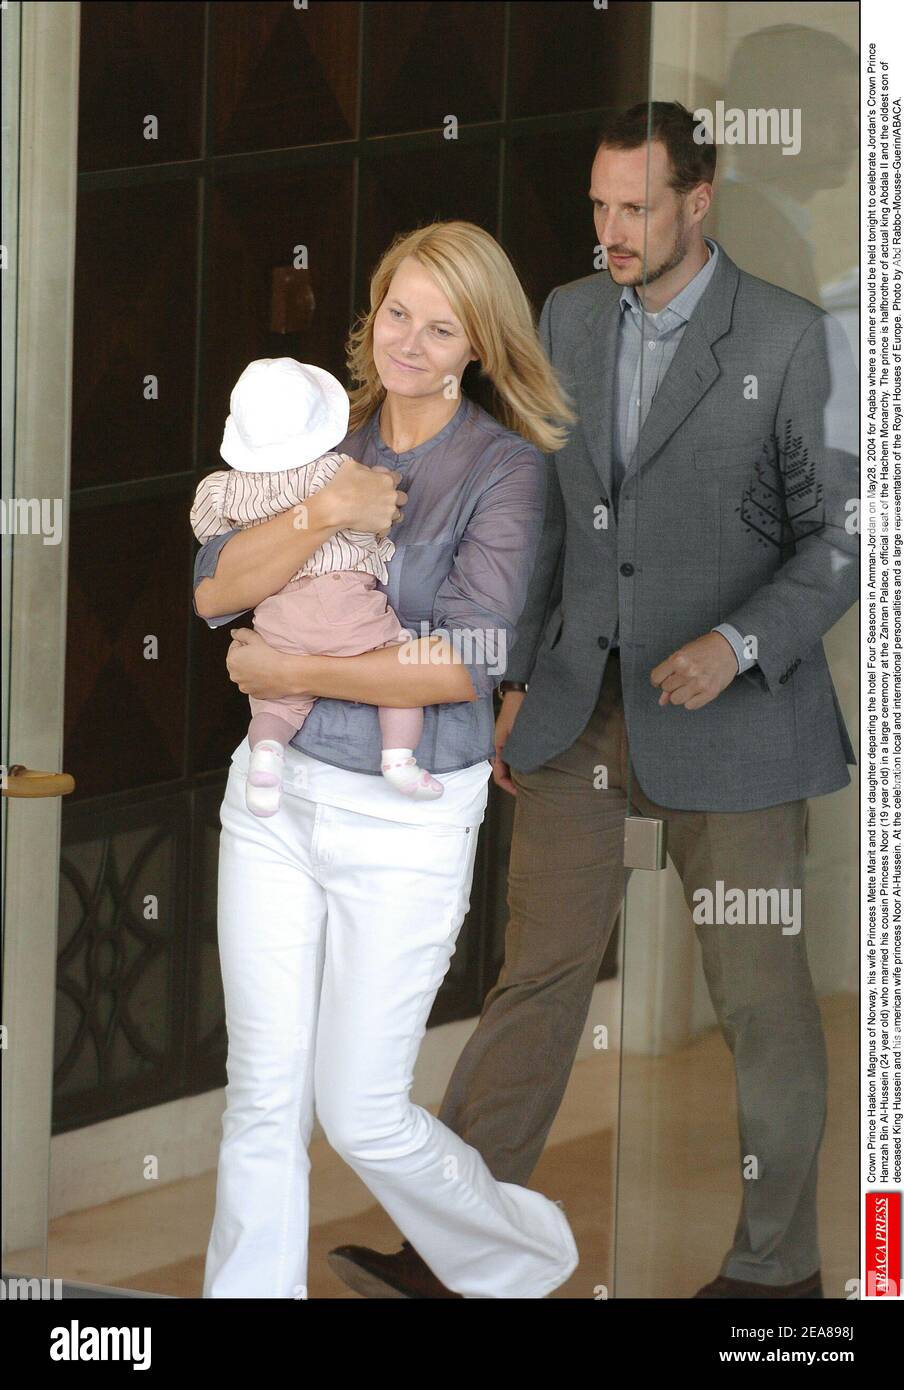 Crown Prince Haakon Magnus of Norway, his wife Princess Mette-Marit and their daughter departing the hotel Four Seasons in Amman-Jordan on May28, 2004 for Aqaba where a dinner should be held tonight to celebrate Jordan's Crown Prince Hamzah Bin Al-Hussein (24 year old) who married his cousin Princess Noor (19 year old) in a large ceremony at the Zahran Palace, official seat of the Hachem Monarchy. The prince is halfbrother of actual king Abdala II and the oldest son of deceased King Hussein and his american wife princess Noor Al-Hussein. At the celebration local and international personalities Stock Photo